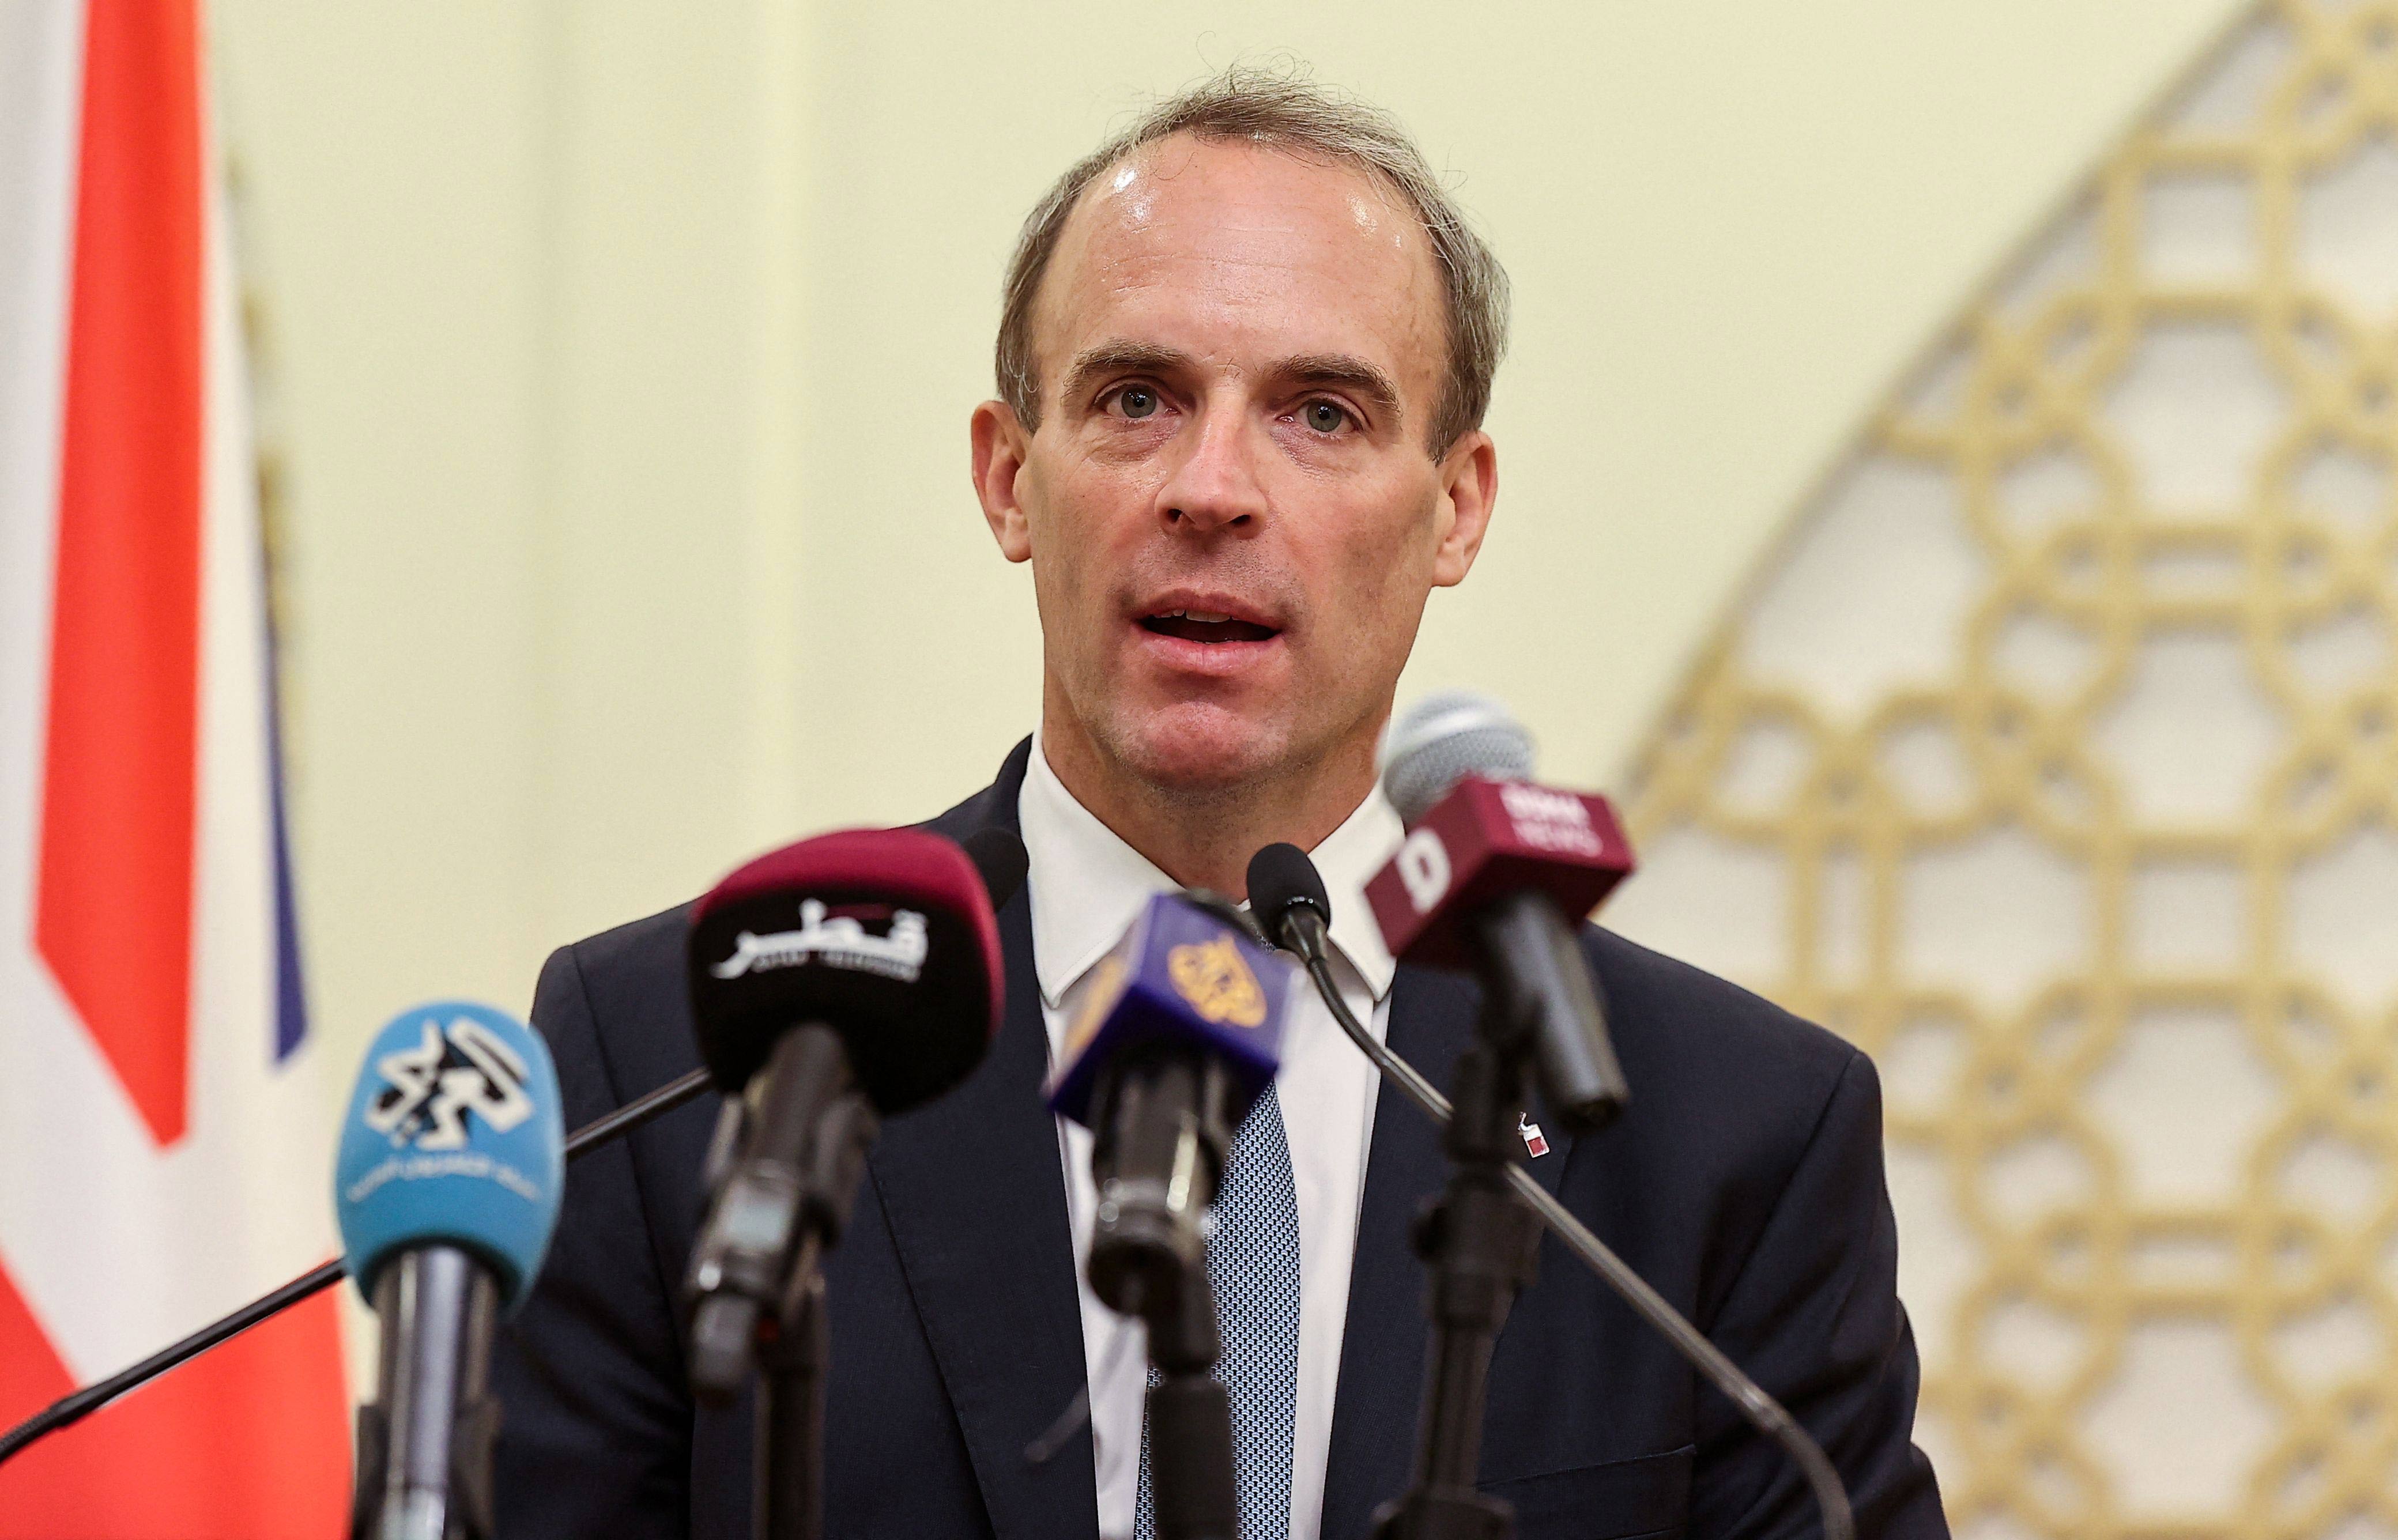 Britain's Foreign Secretary Dominic Raab speaks during a joint press conference with Qatar's foreign minister in Doha on September 2.